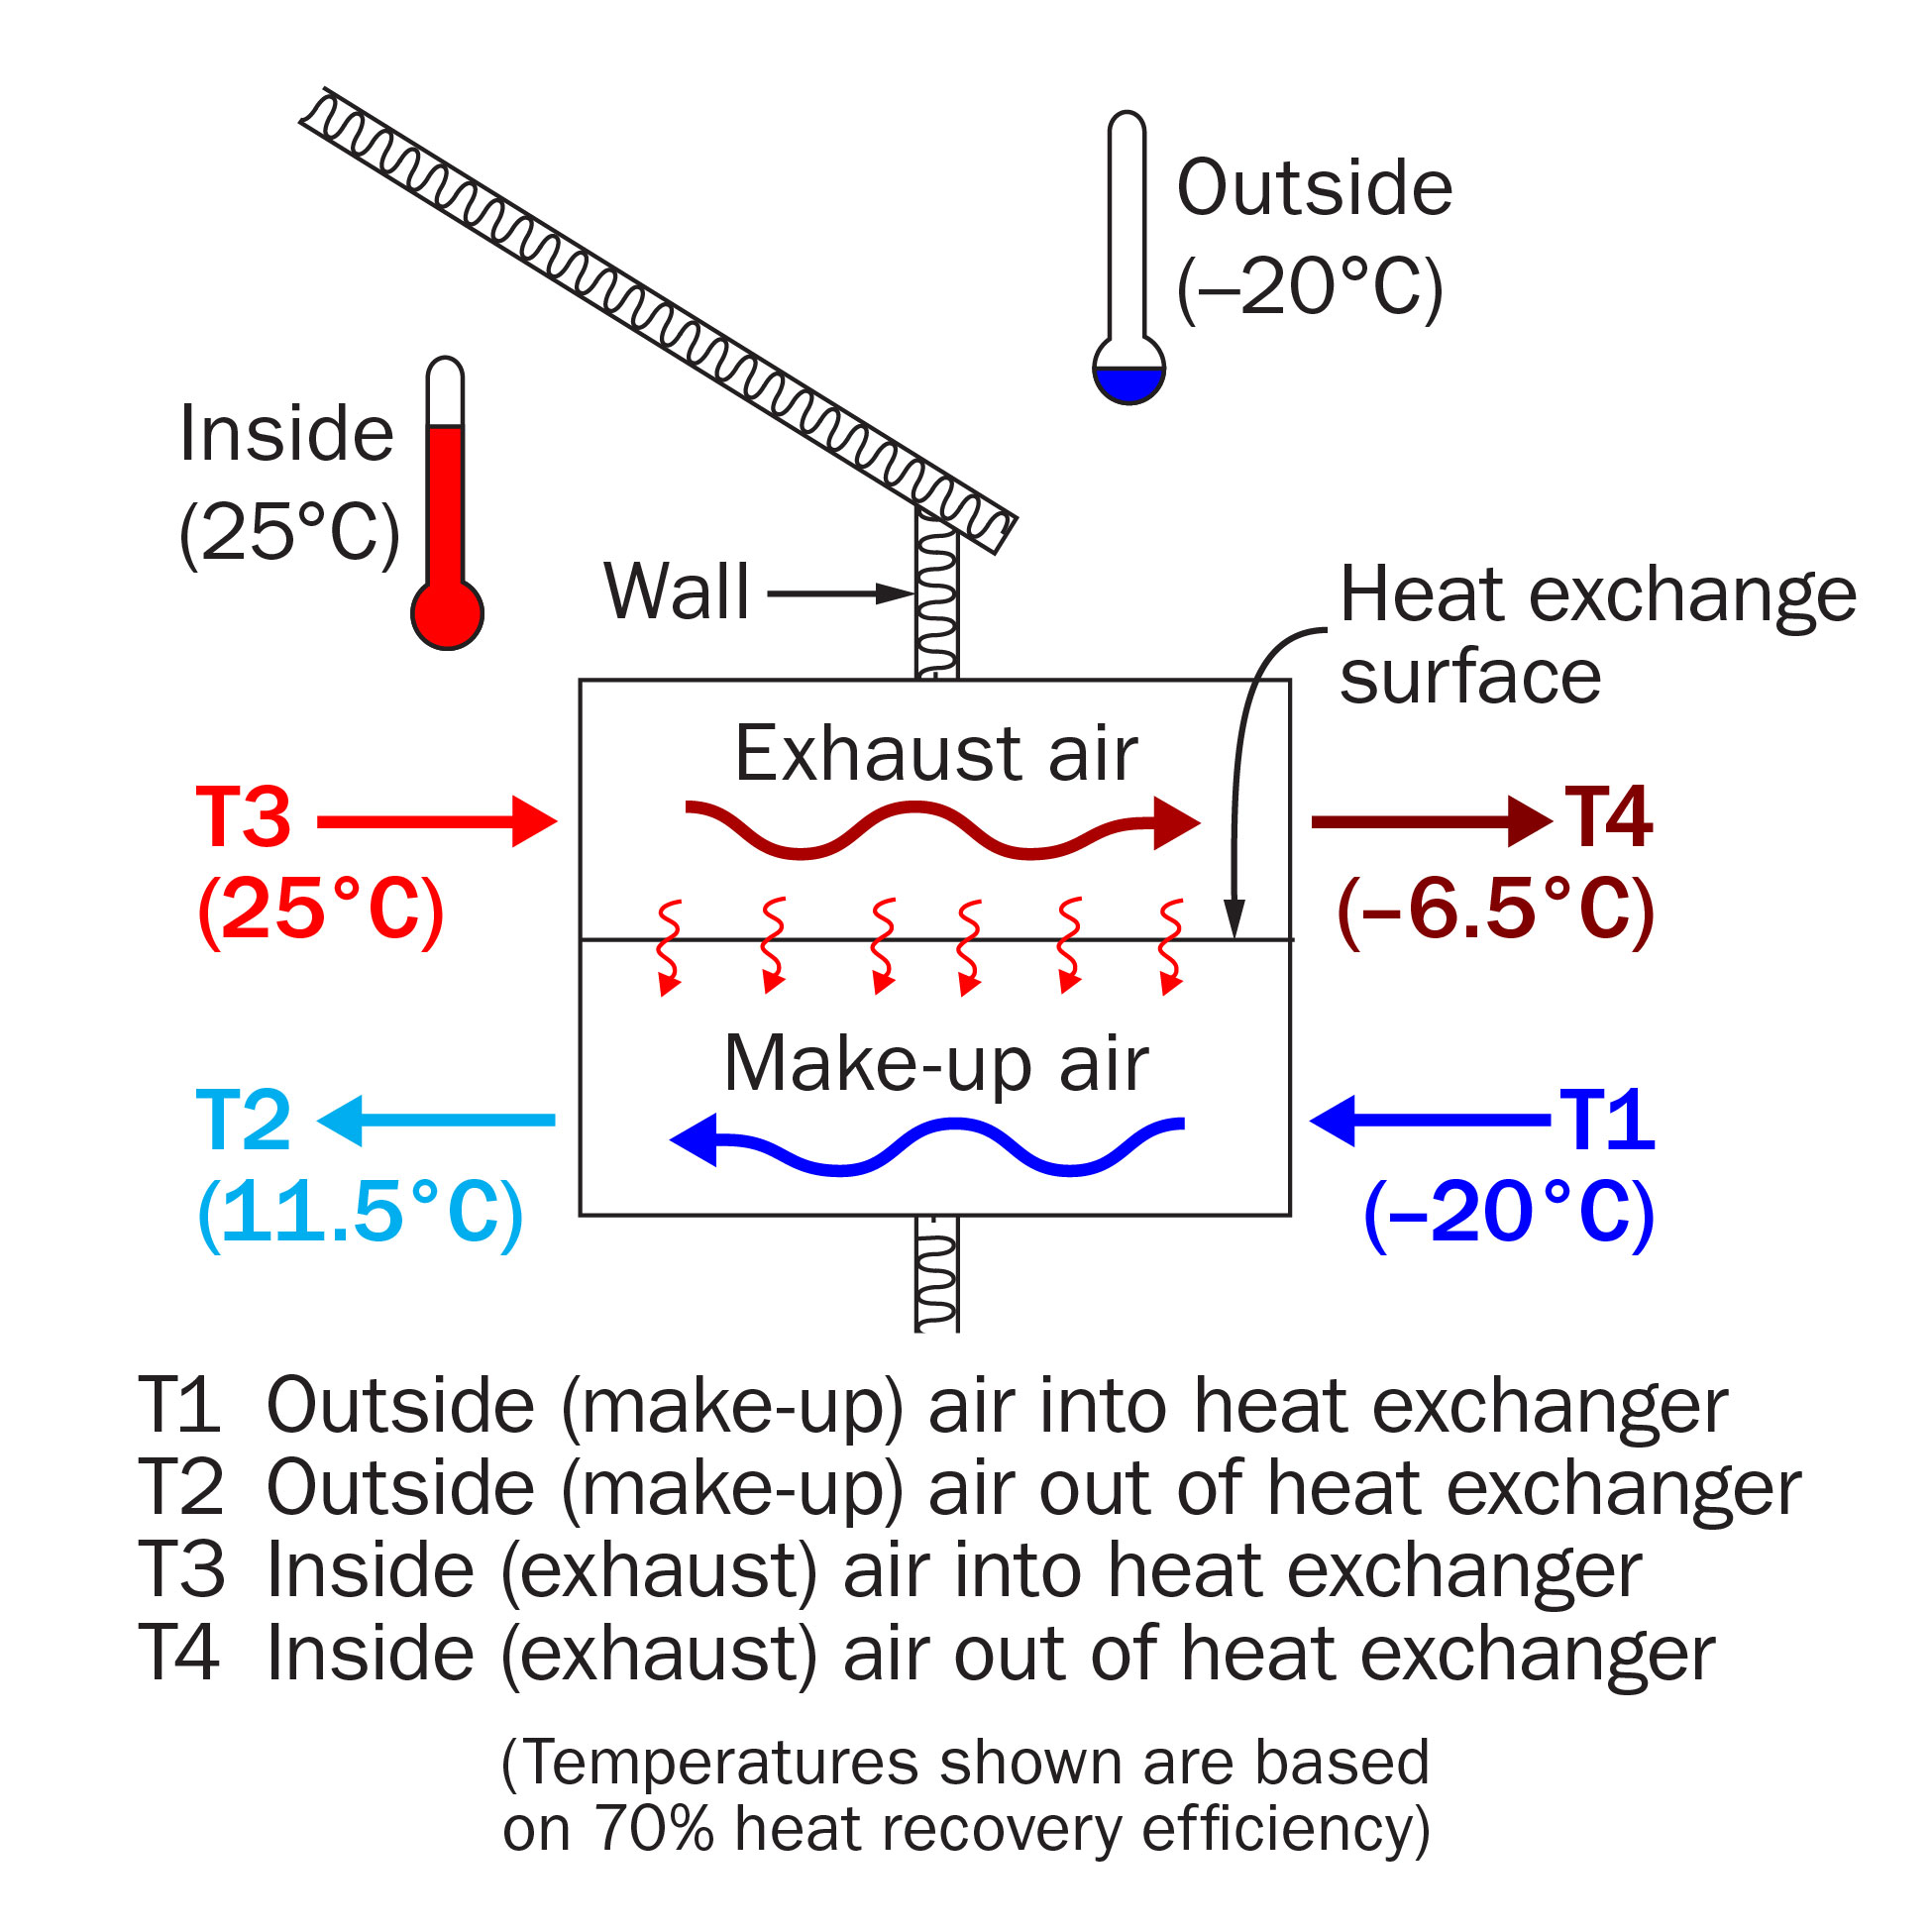 This diagram of a ventilation heat exchanger shows how air moves through a heat exchanger, and how the make-up air gets warmed by the exhaust air. The example temperatures shown in the diagram are based on 70% heat recovery in the heat exchanger.